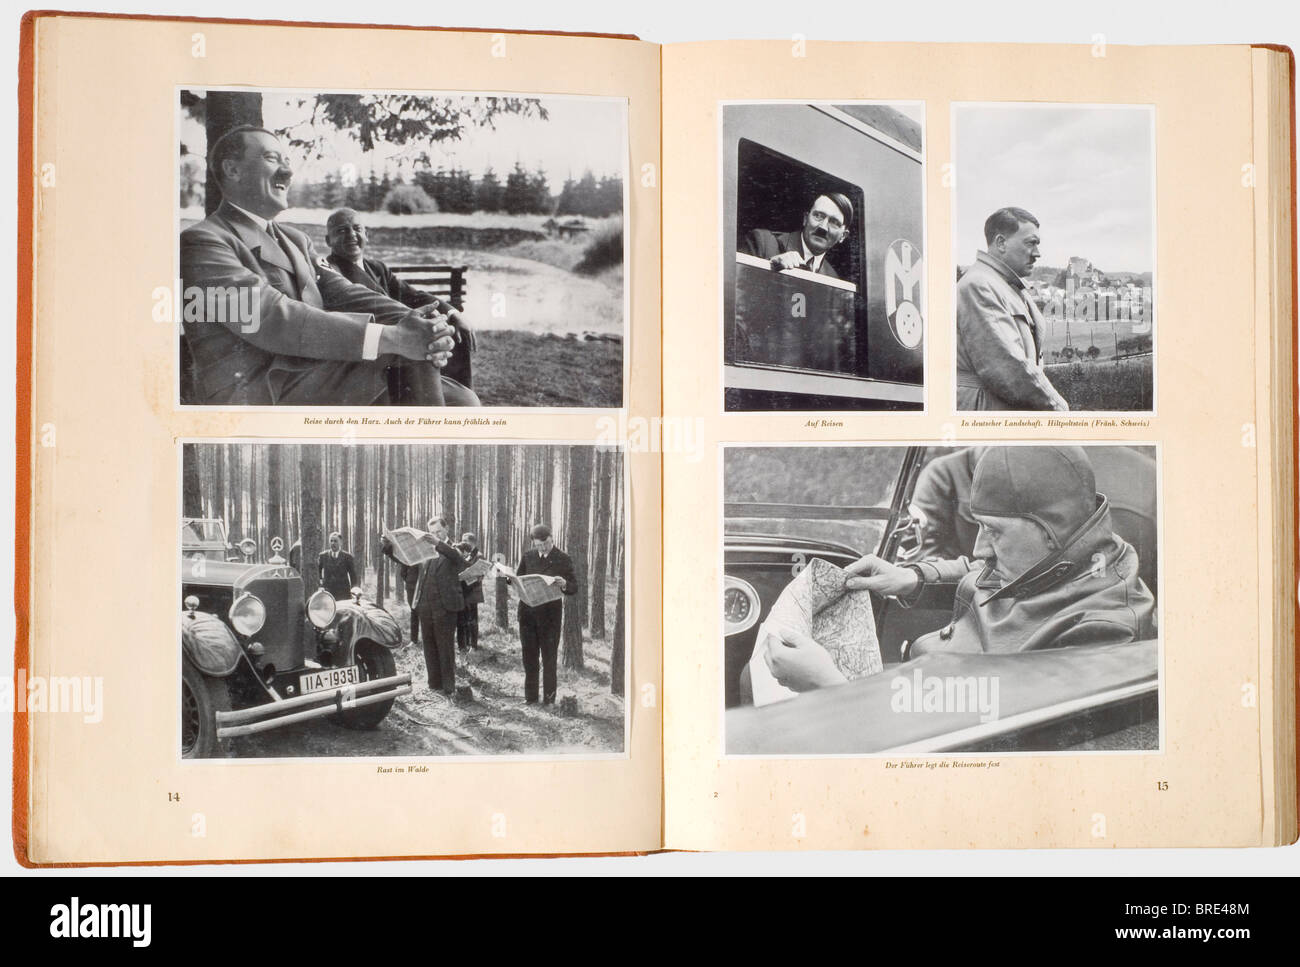 Adolf Hitler, a personal copy of the illustrated book 'Adolf Hitler' 'Adolf Hitler - Bilder aus dem Leben des Führers', ed. Cigarette/Picture Service Altona/Bahrenfeld 1936. The last page with the inscription 'Three hundred copies of the 'Adolf Hitler' book published by F.A. Brockhaus, Leipzig, were bound in real saffian leather. This copy bears the number '1'' (transl.). On the inside of the cover the ex libris 'Adolf Hitler', on the flyleaf the handwritten ink signature 'Martin Bormann Obersalzberg 26.7.36'. Incl. dust jacket. De luxe edition in gold-embossed, Stock Photo